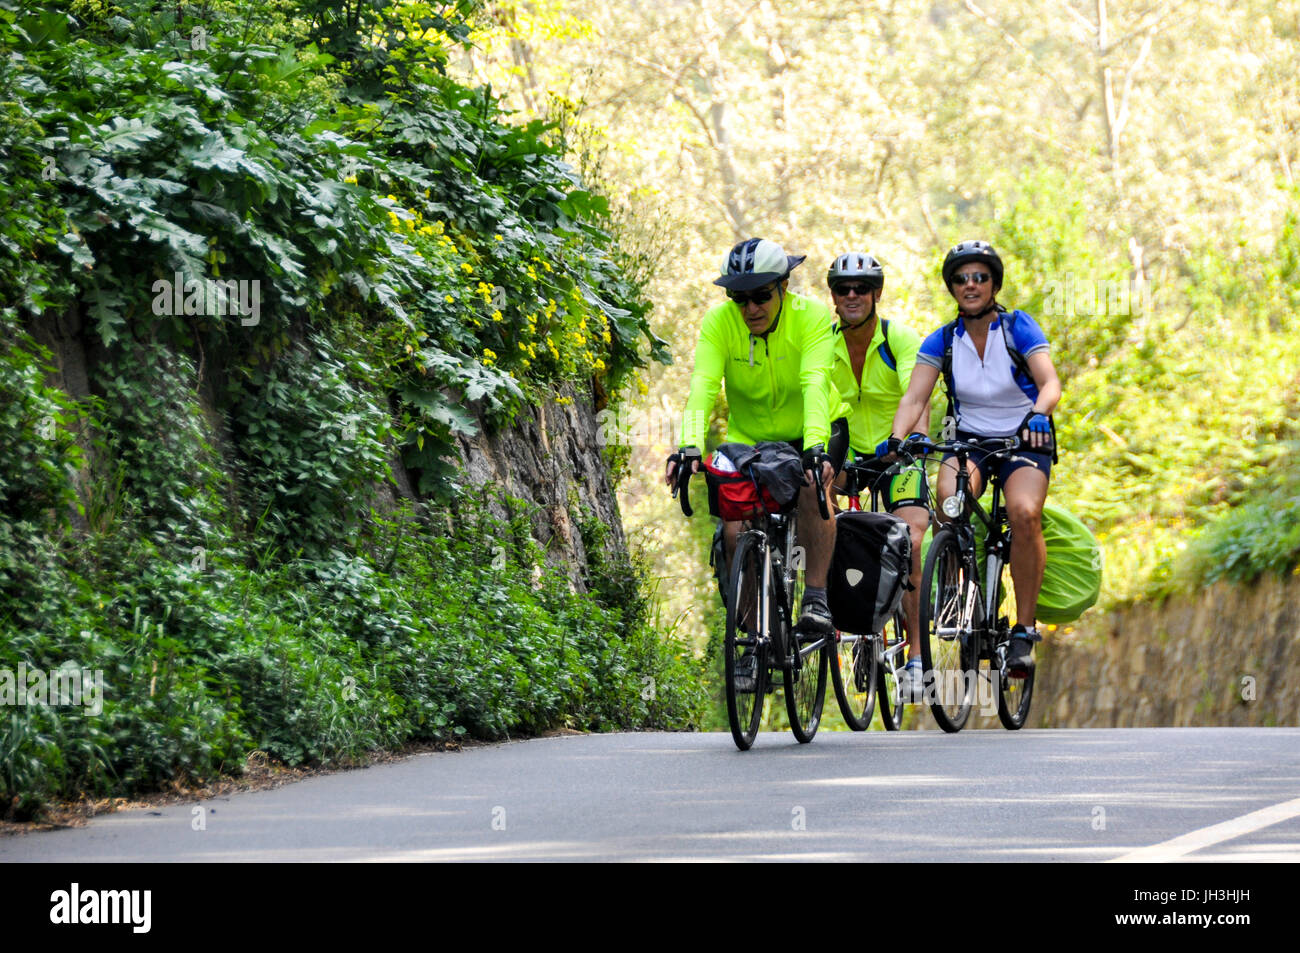 Three touring cyclists riding their bicycles on a country road in Calabria, Italy. Stock Photo